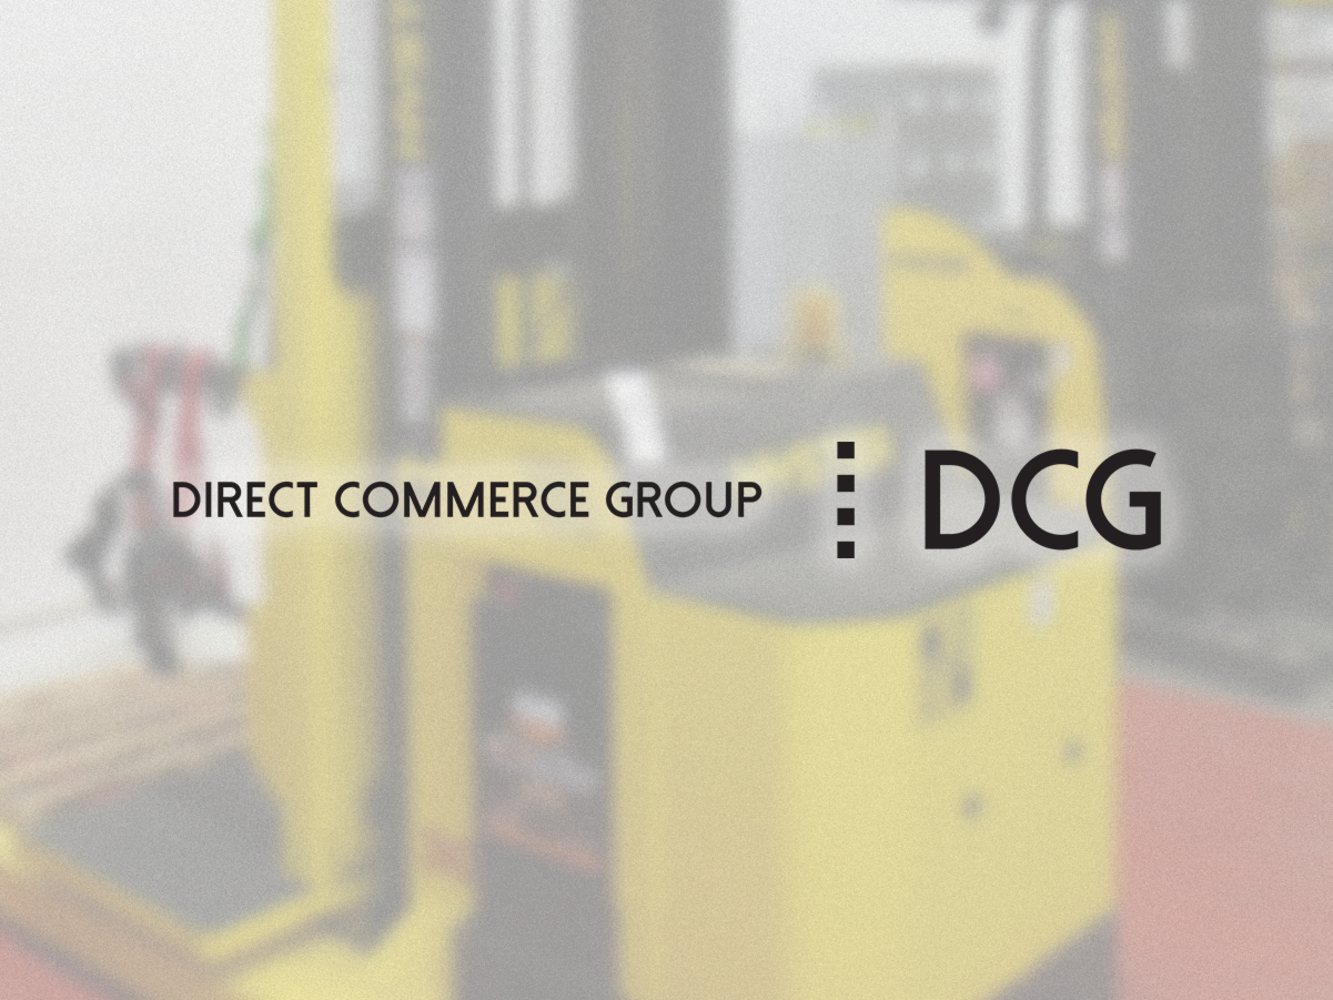 Material Handling & Order Fulfillment Equipment - High Speed Side Packaging Machines – Order Pickers – assets from Direct Commerce Group